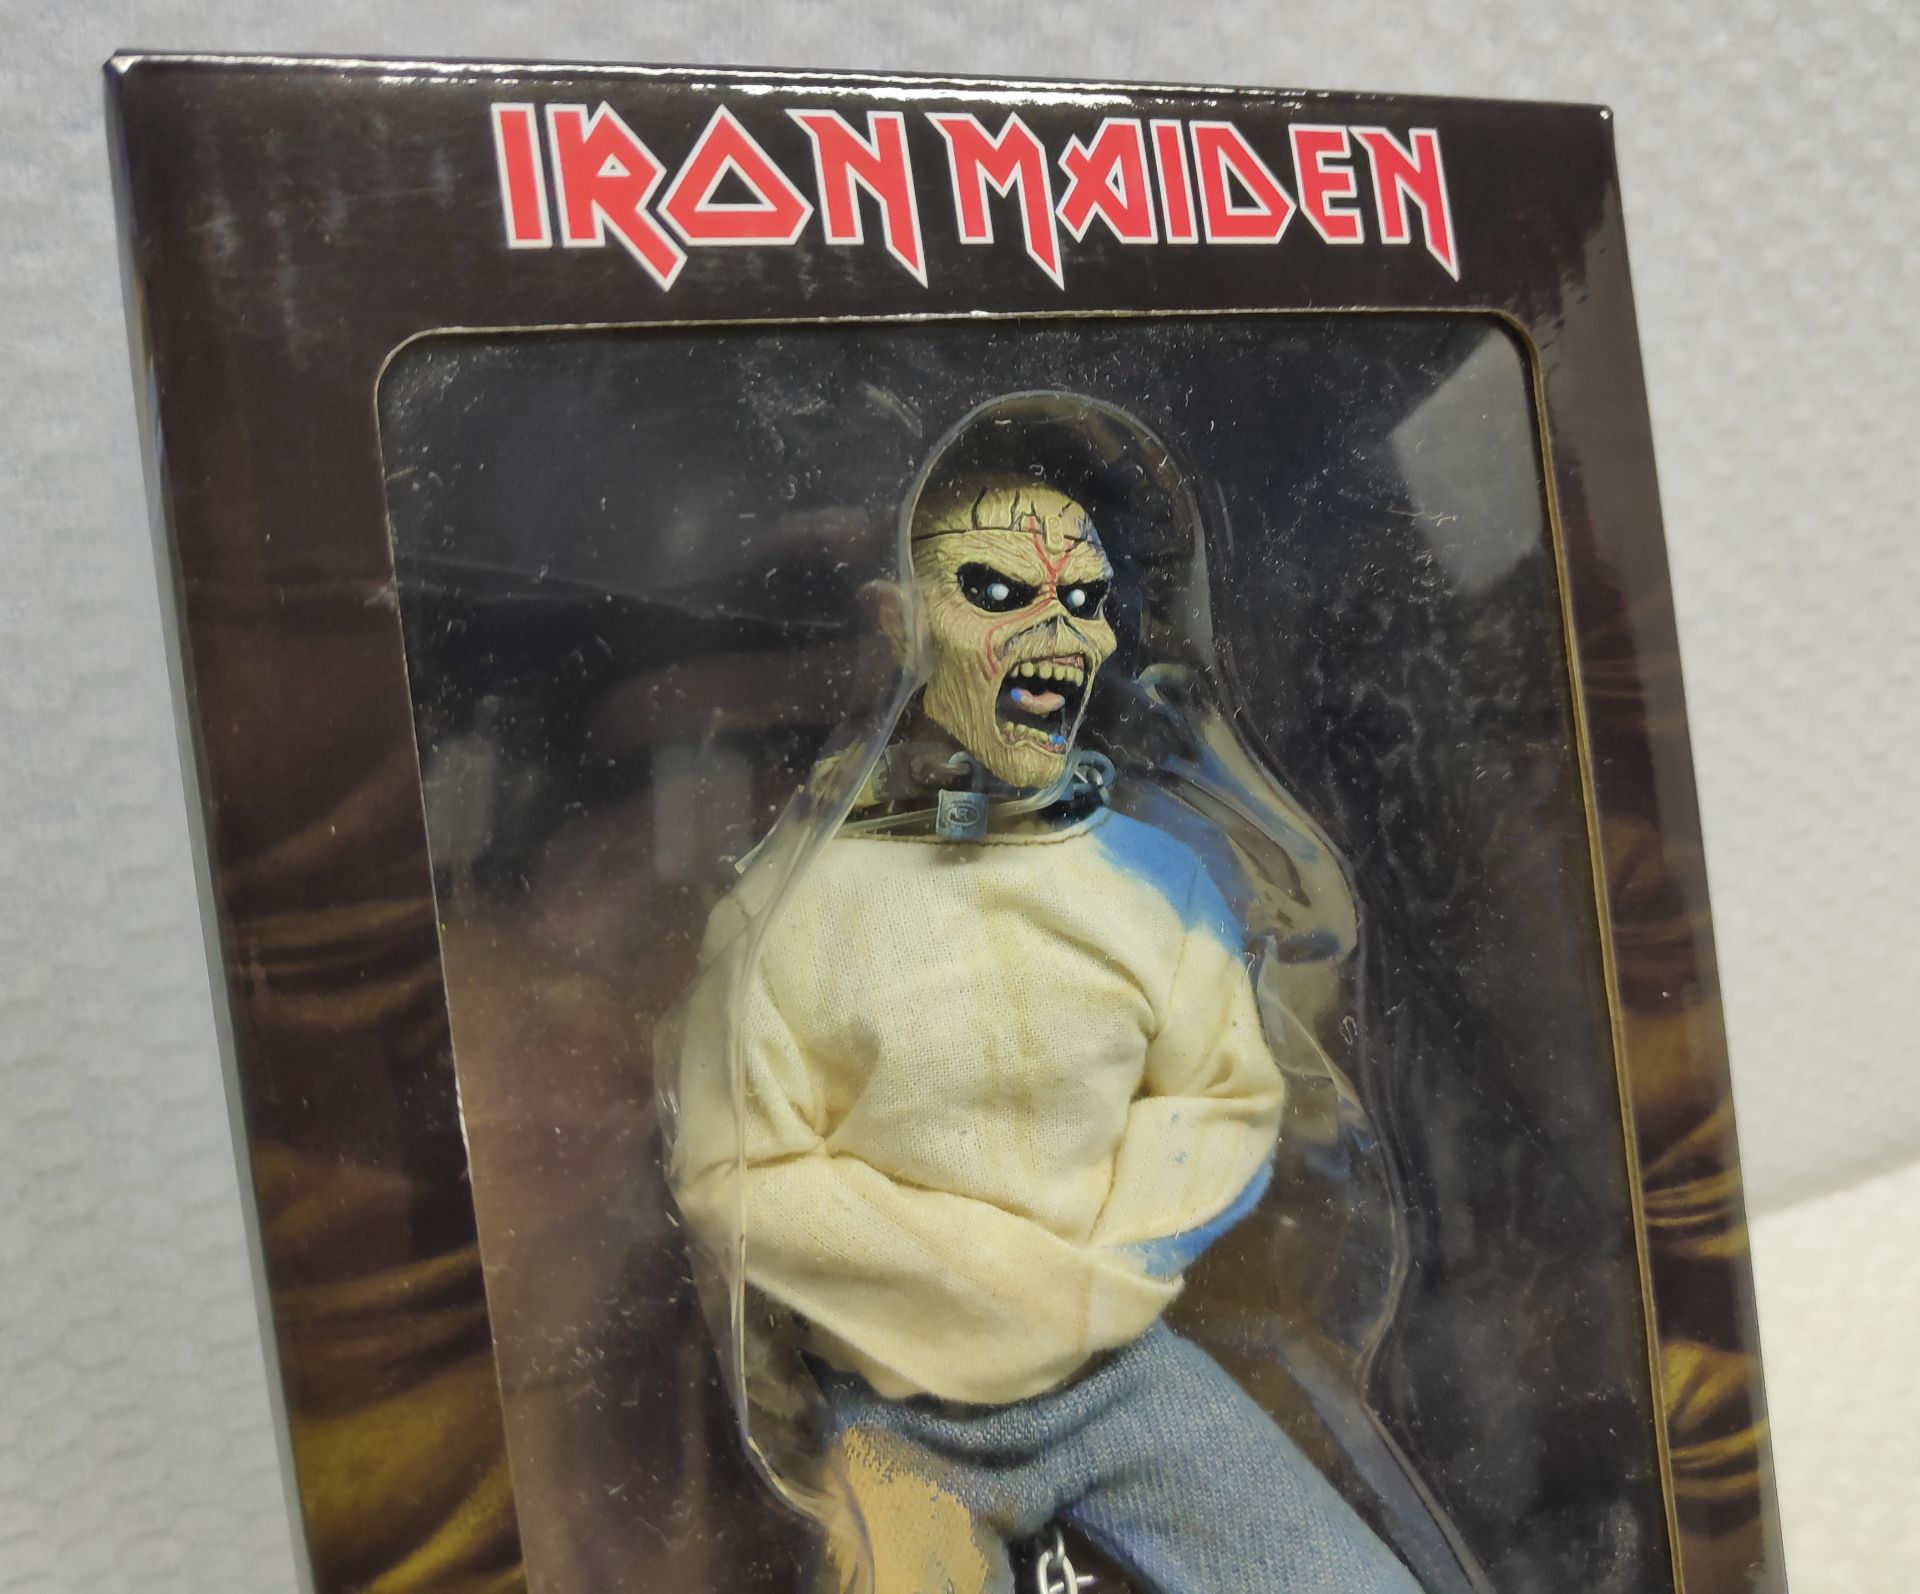 1 x Iron Maiden Eddie Piece of Mind NECA Action Figure - New/Boxed - HTYS166 - CL720 - Location: Alt - Image 10 of 11